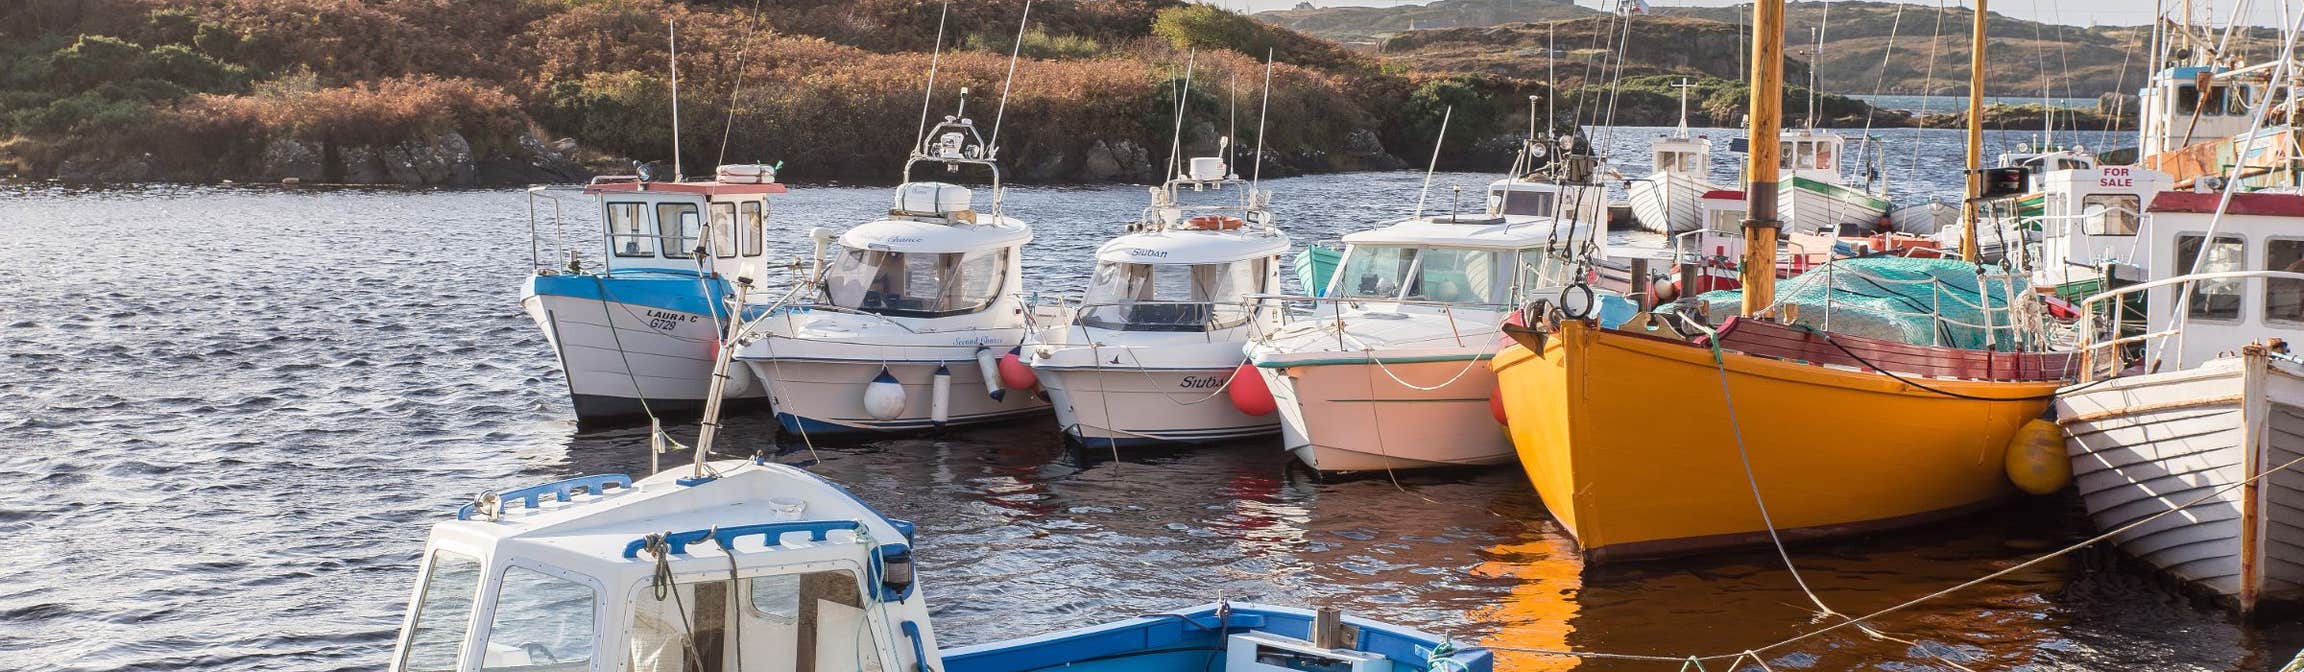 Image of boats in Gweedore in County Laois